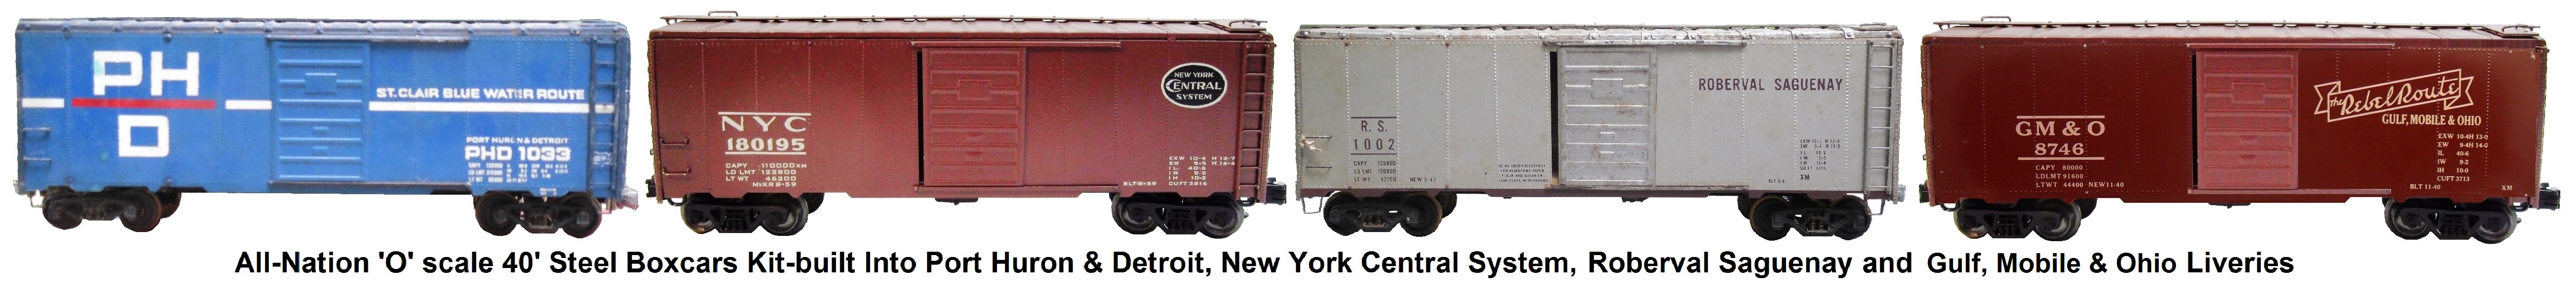 All-Nation 'O' scale 40' Steel Box Cars Kit-built into #6204 Port Huron & Detroit, New York Central, #3633 Roberval Saguenay and #3623 Gulf, Mobile & Ohio Liveries